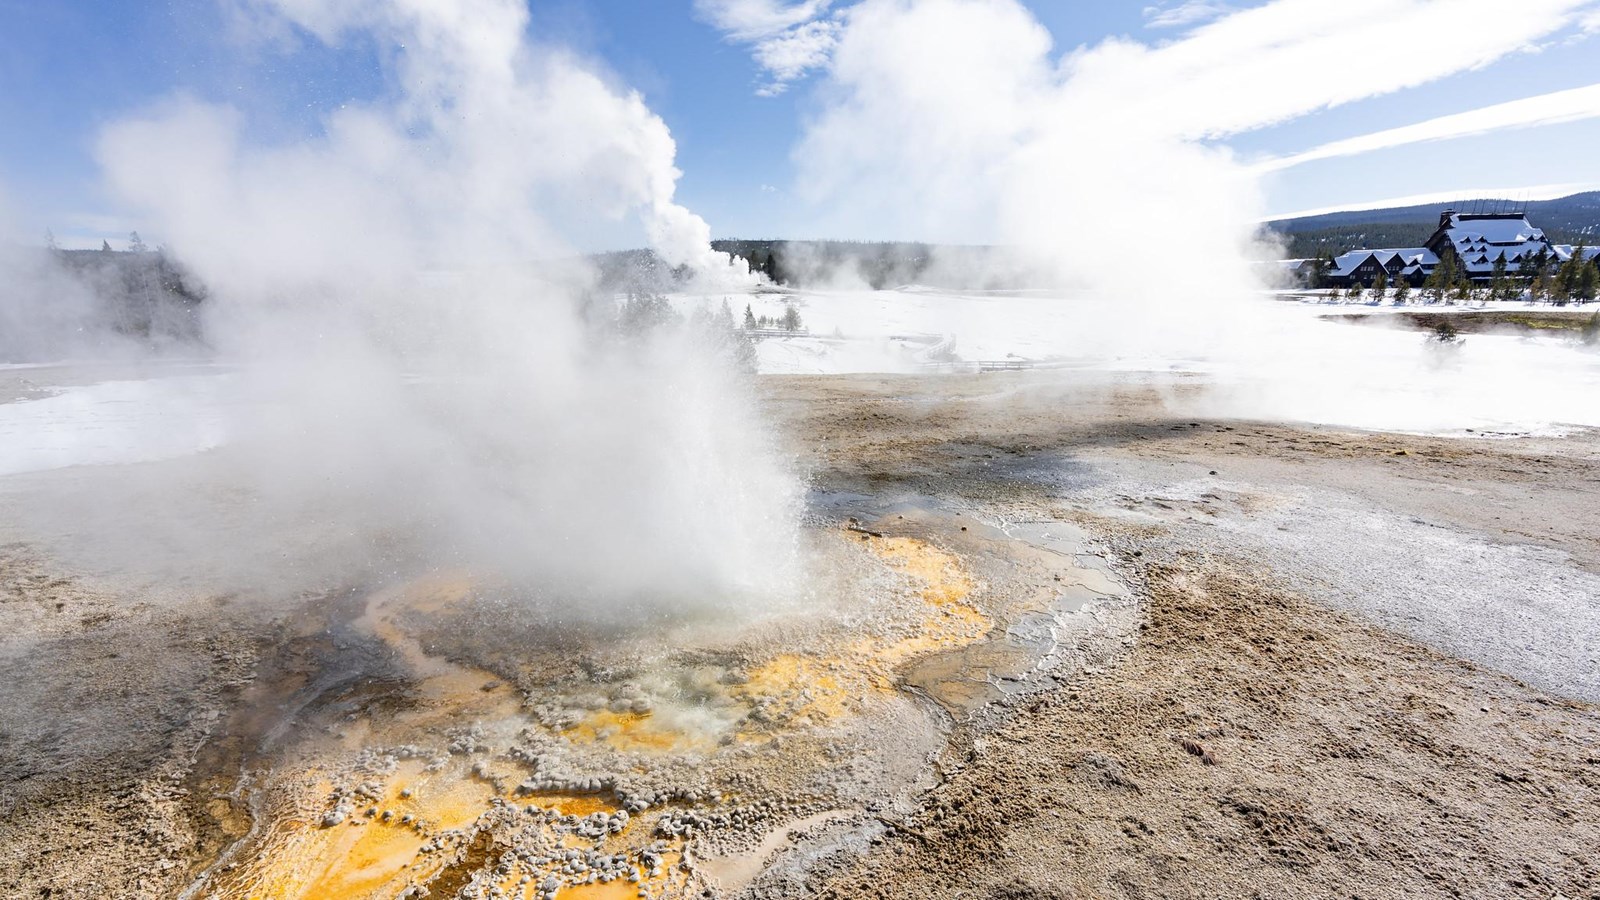 Water sprays a couple of feet into the air from a geyser vent surrounded yellow, microbial mats.